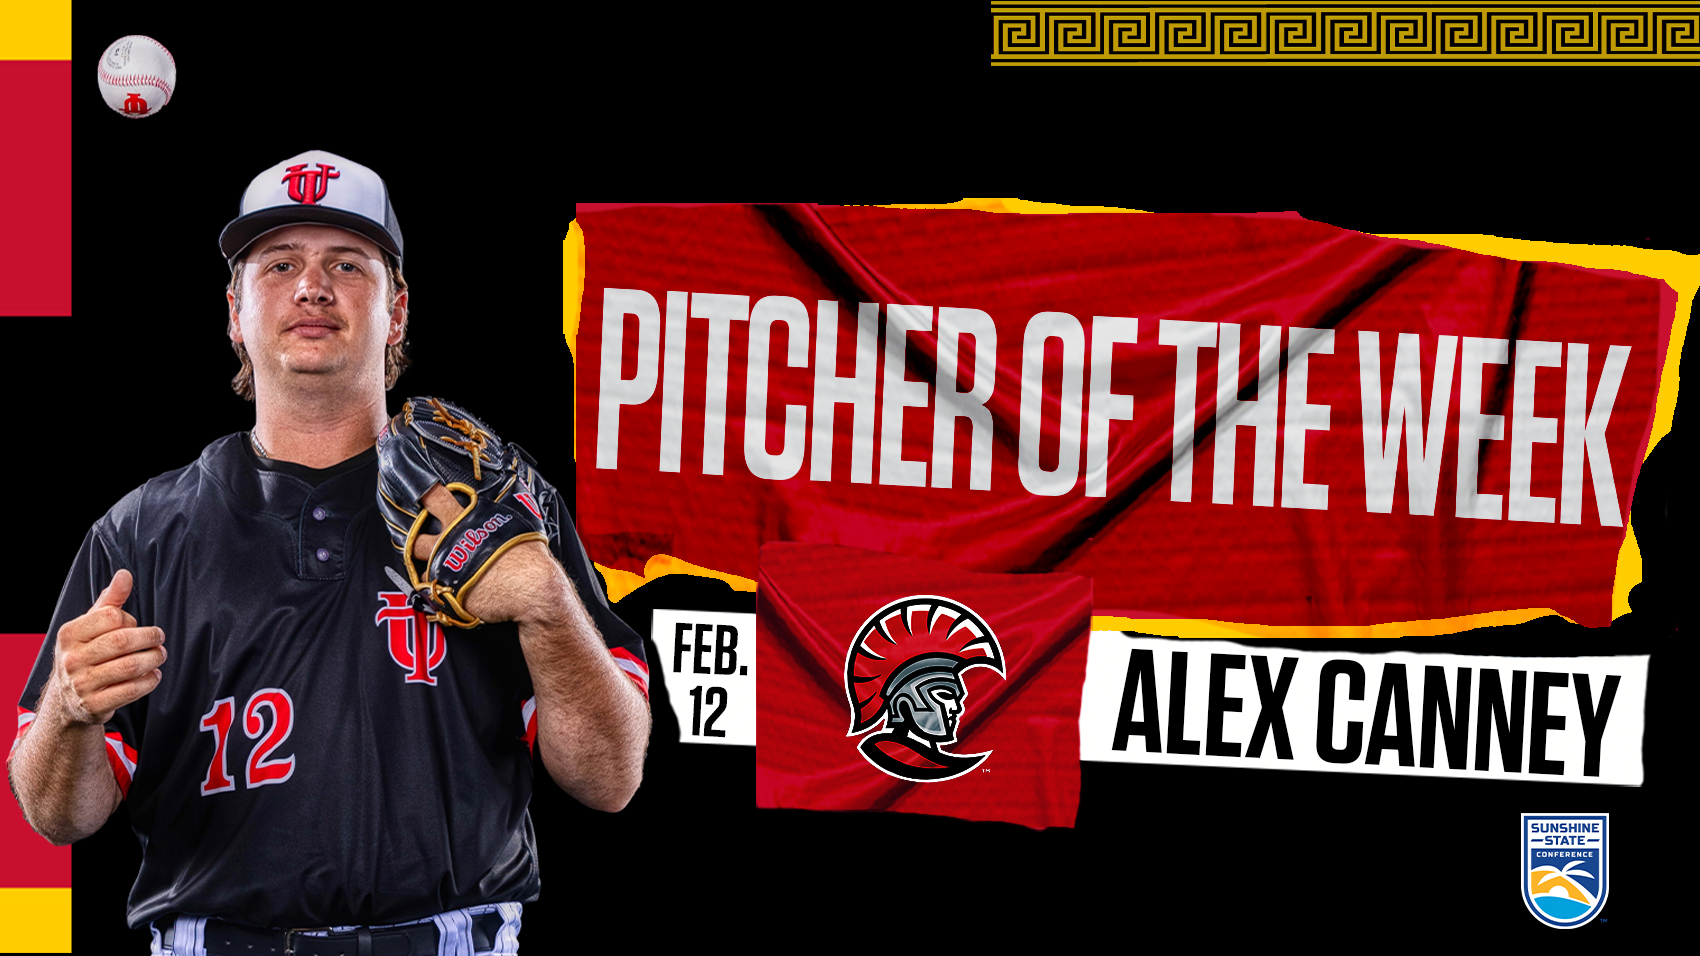 Sunshine State Conference Pitcher of the Week Alex Canney